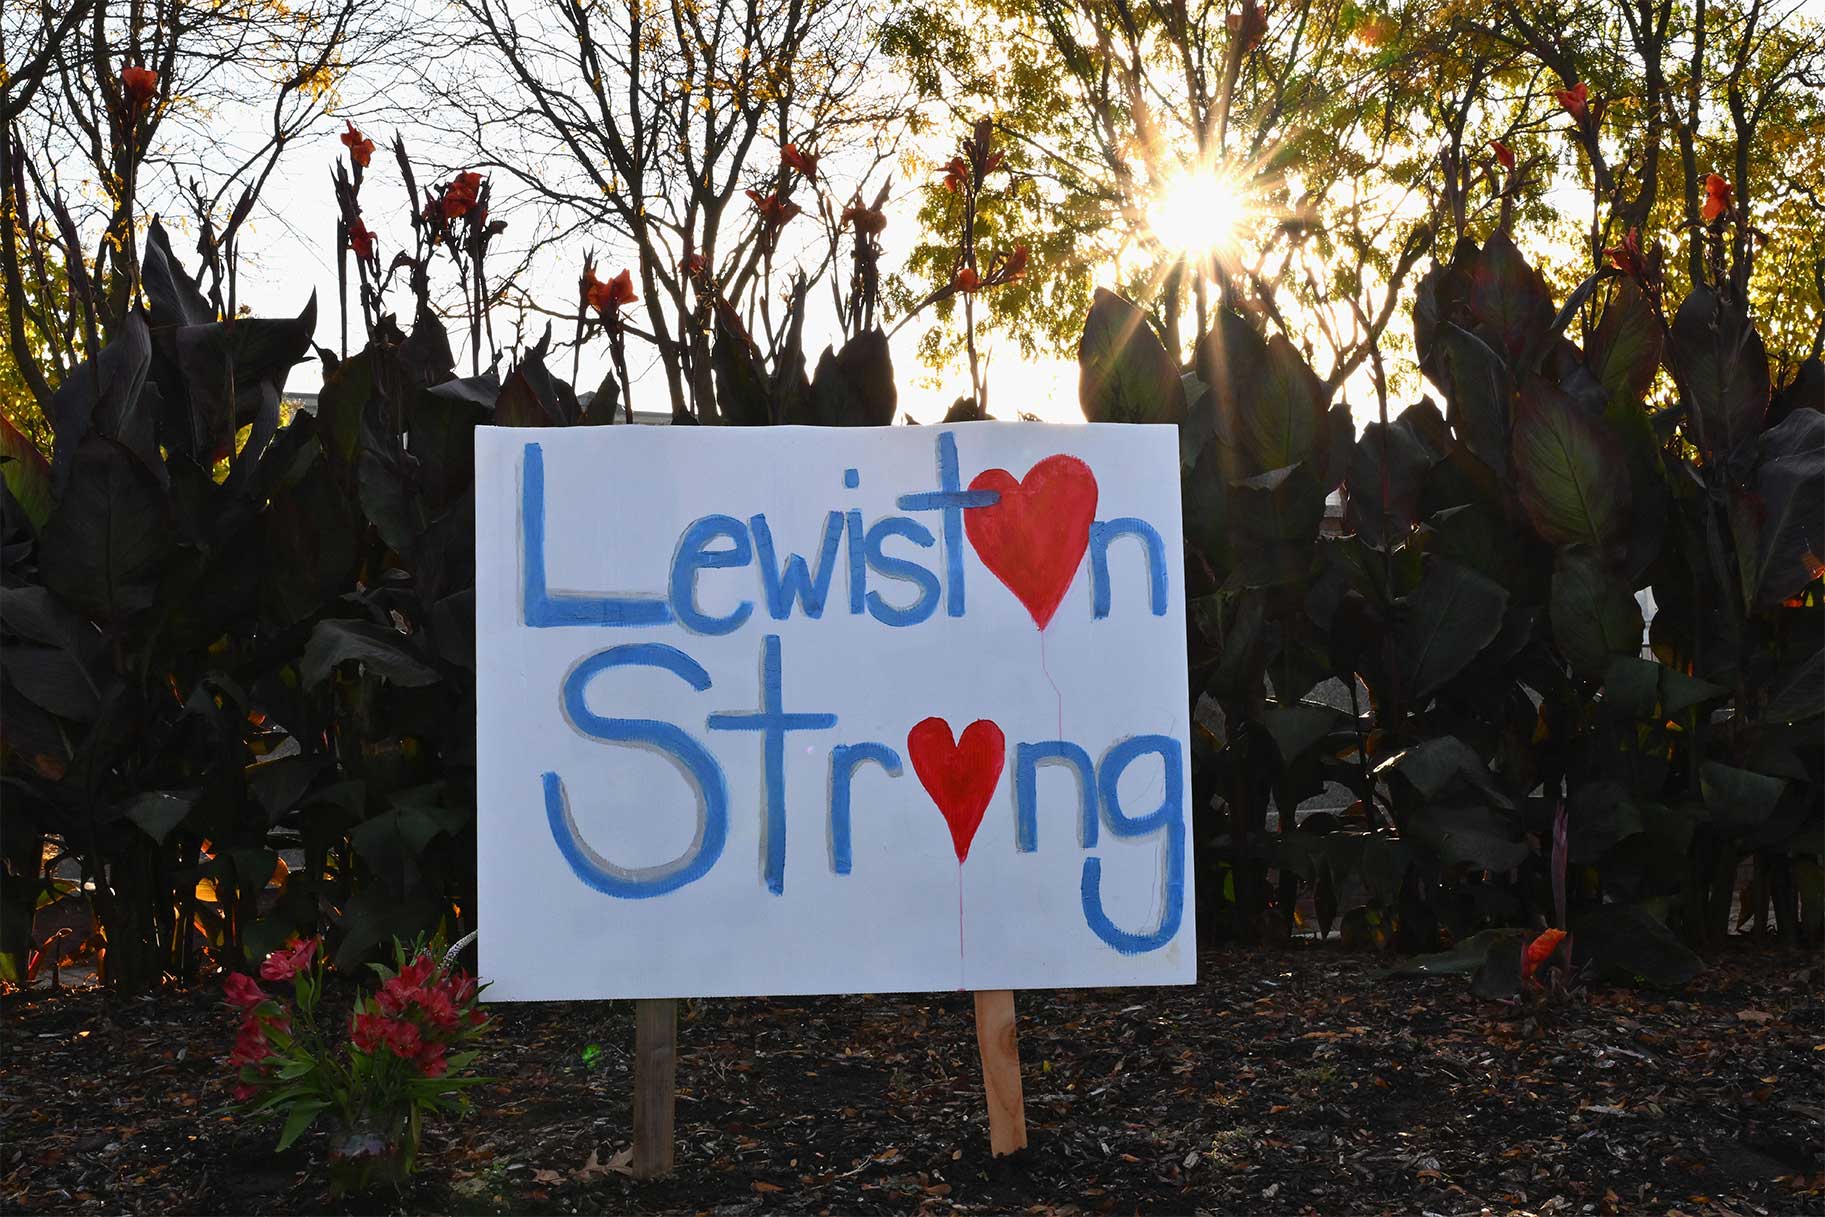 A sign reading Lewiston strong after the Lewiston Maine Shooting